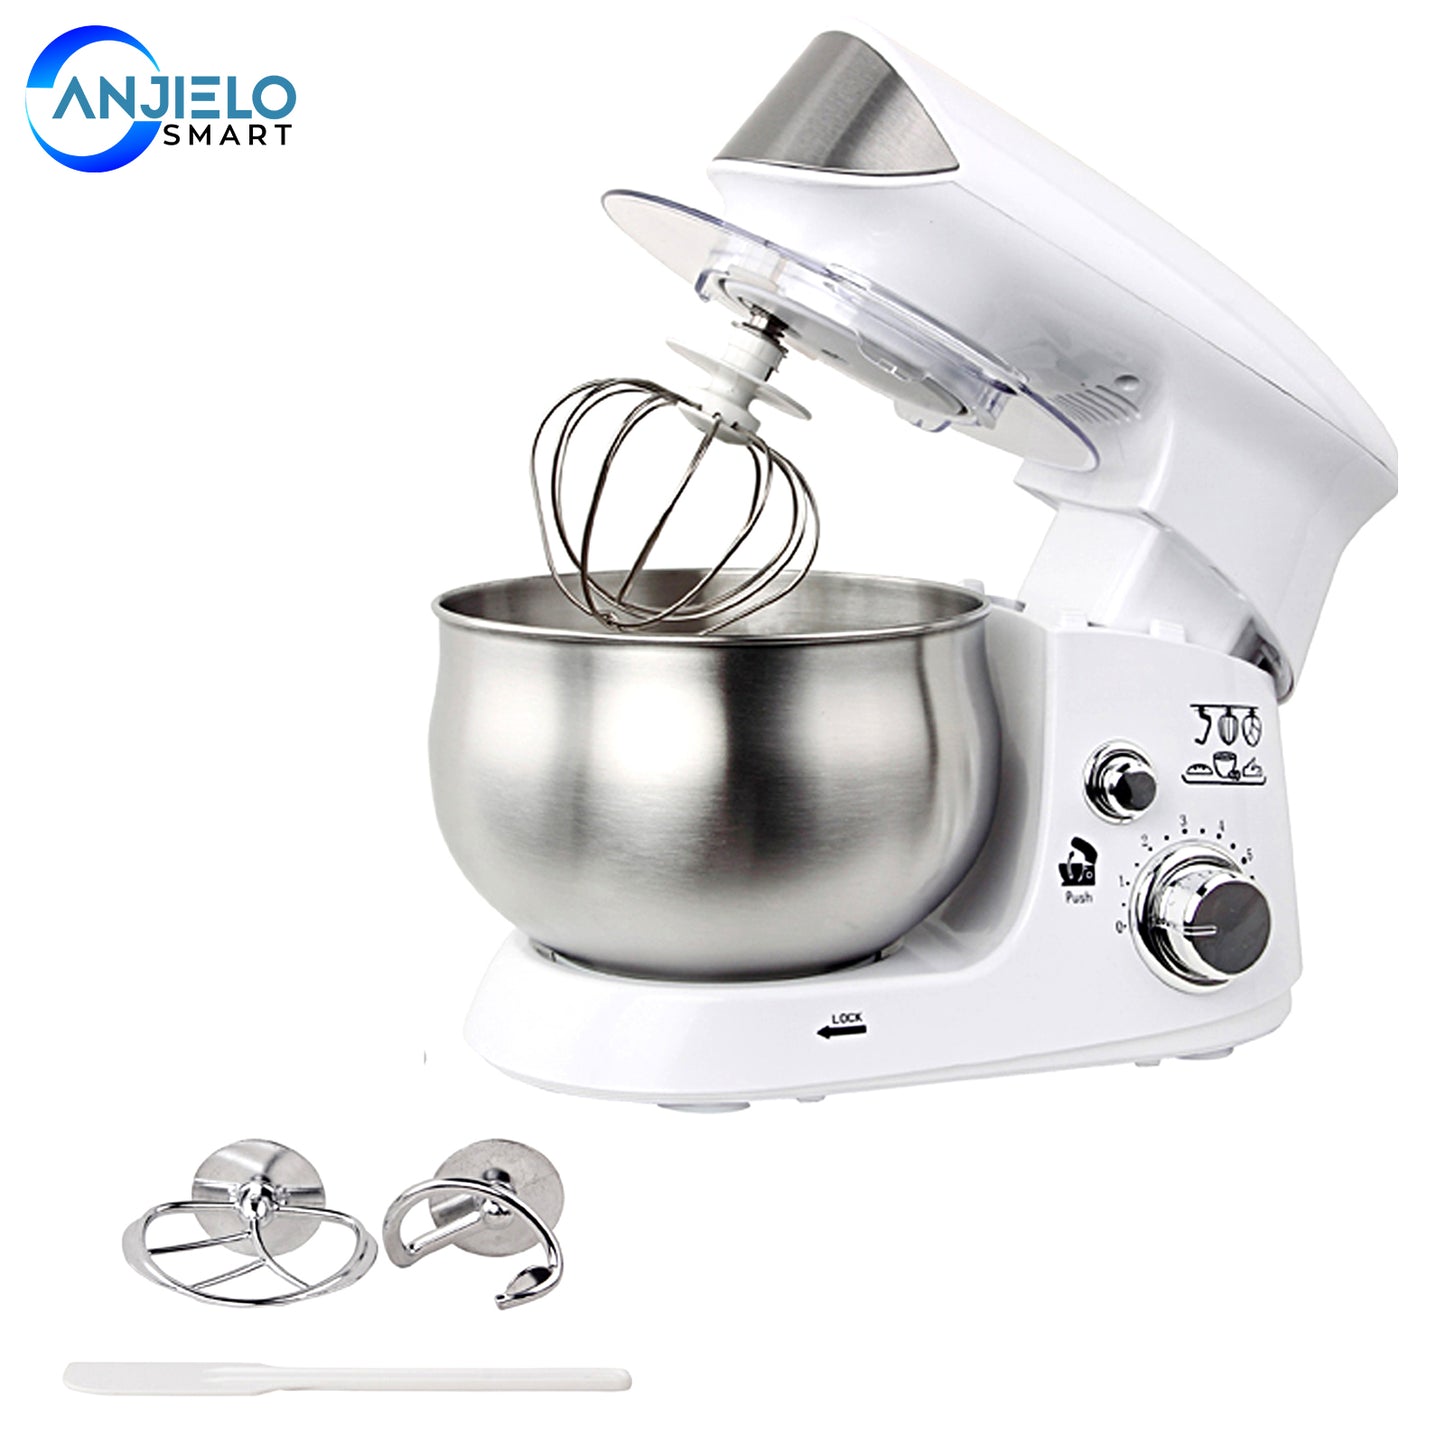 AnjieloSmart Stand Mixer 6-Speed 600W 3.7QT with Dough Hook Whisk Beater and Cover